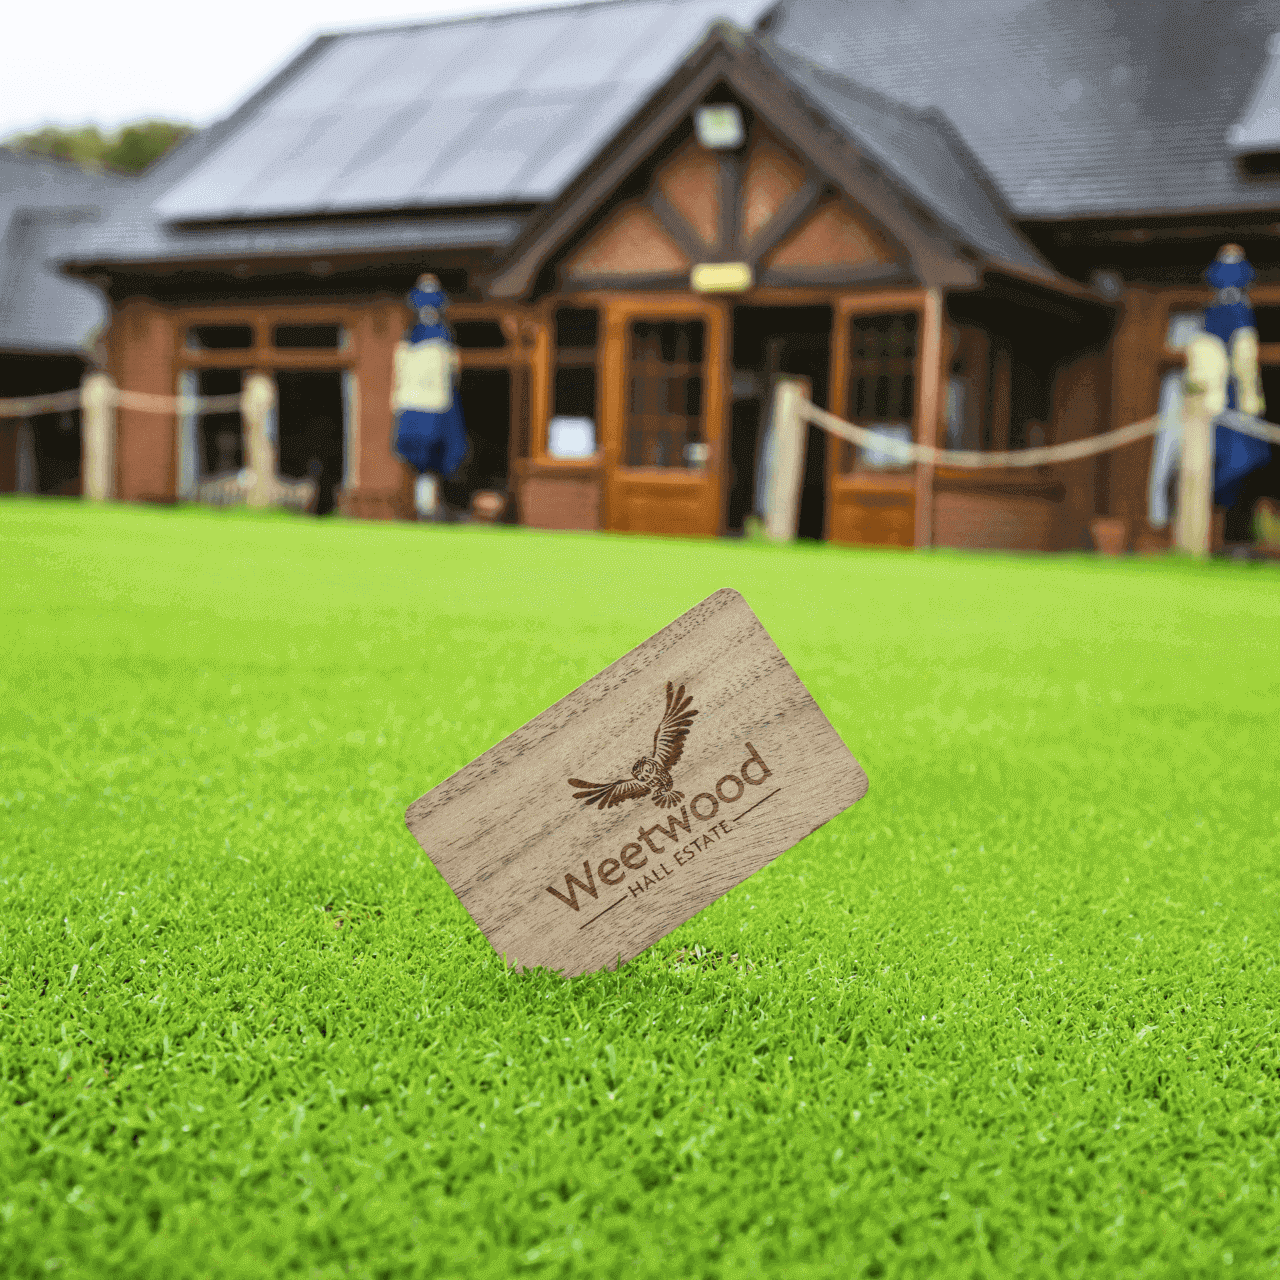 Sustainable Wood Card printed for Weetwood Hall Estate pictured planted in the ground